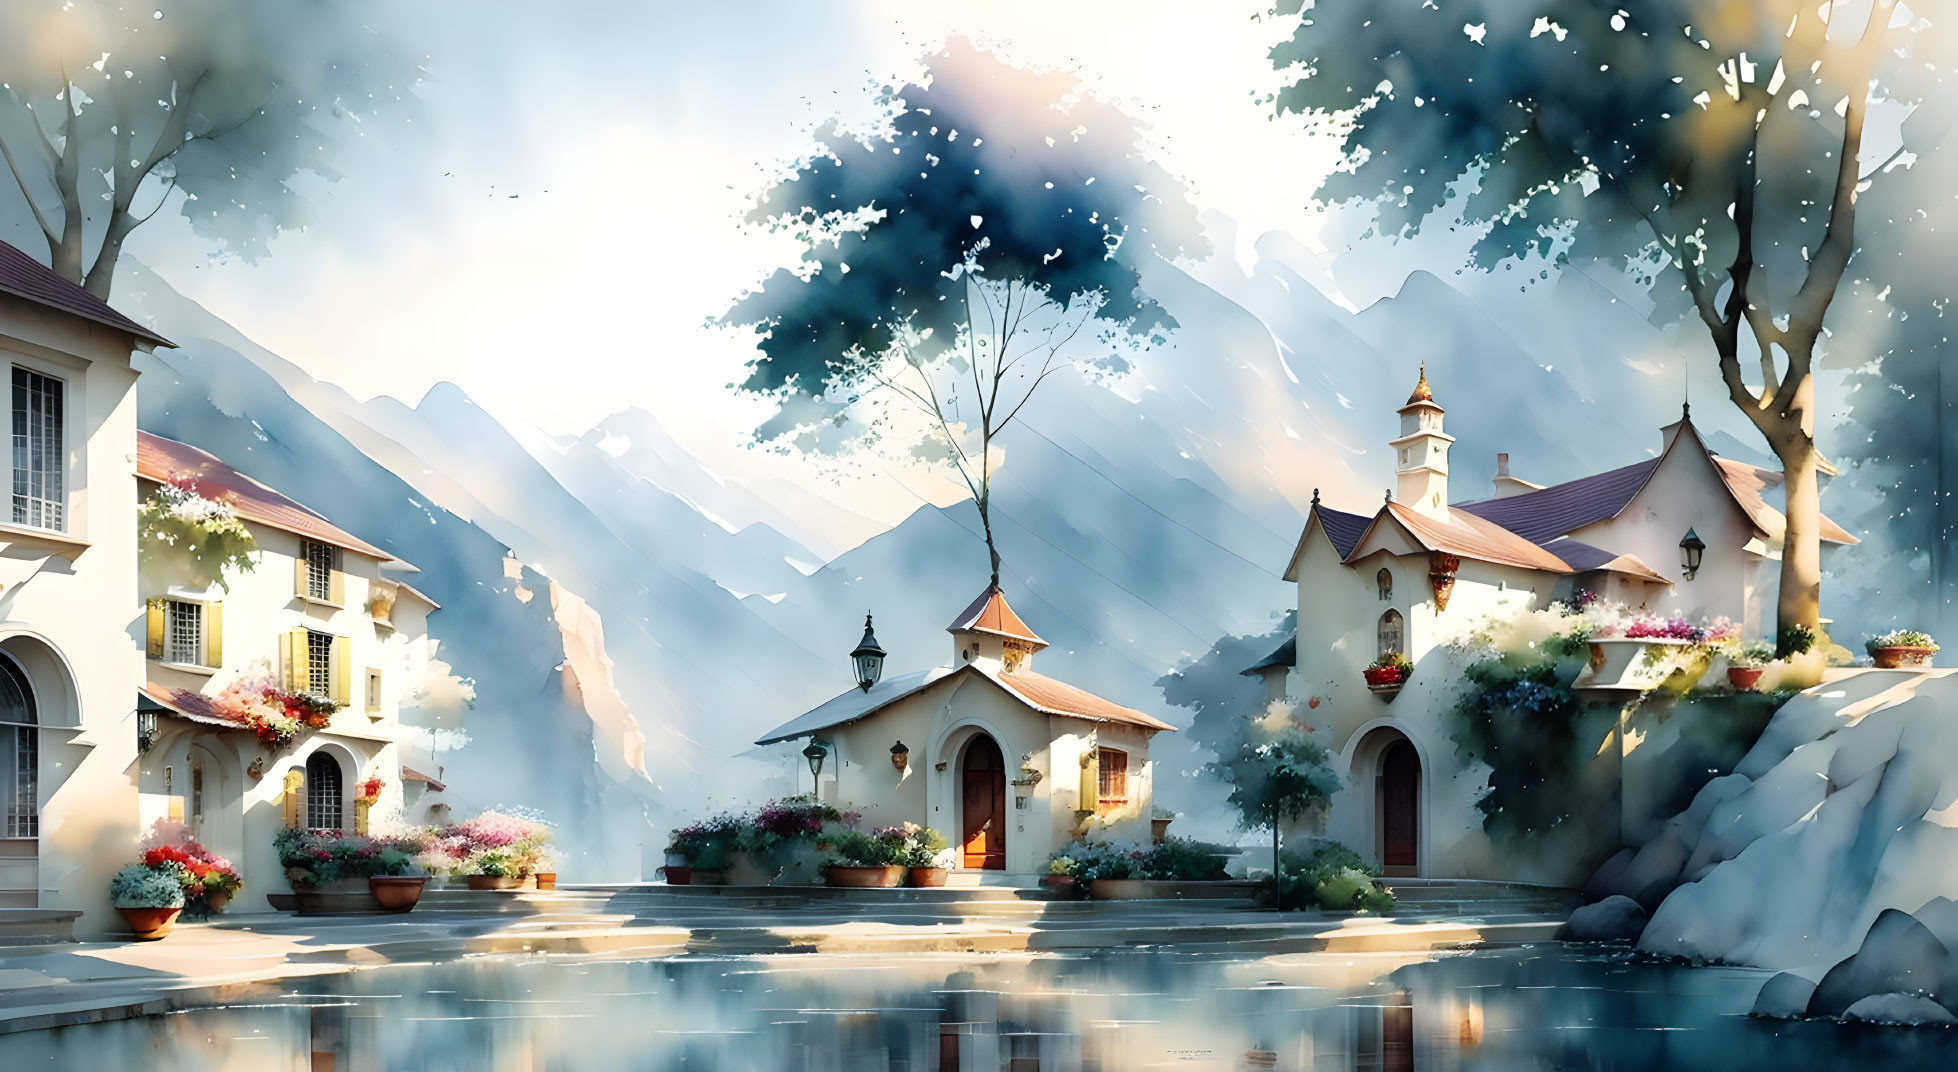 Tranquil village scene with colorful houses, flowers, pond, and misty mountains